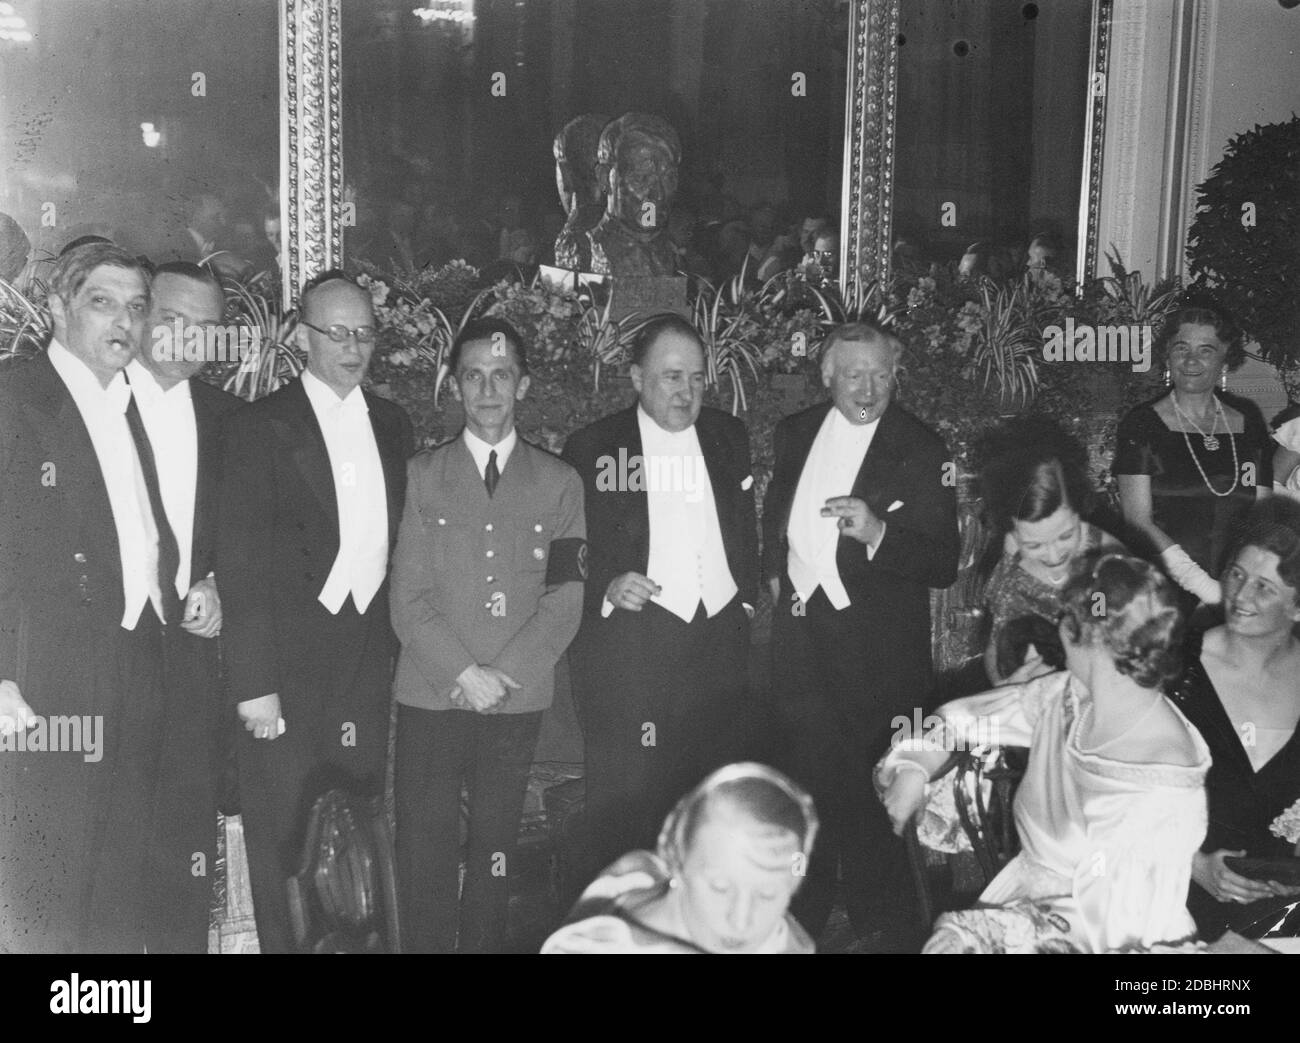 At a ball of the Prussian State Theater in the Hotel Kaiserhof in Berlin in early 1935 (from left to right): opera director Clemens Krauss, actor Paul Hartmann, actor Gustaf Gruendgens, Reich Minister Joseph Goebbels, State Secretary Walther Funk, actor Werner Krauss and his wife, the actress Maria Bard in conversation with actress Emmy Sonnemann (sitting, future wife of Hermann Goering). Stock Photo